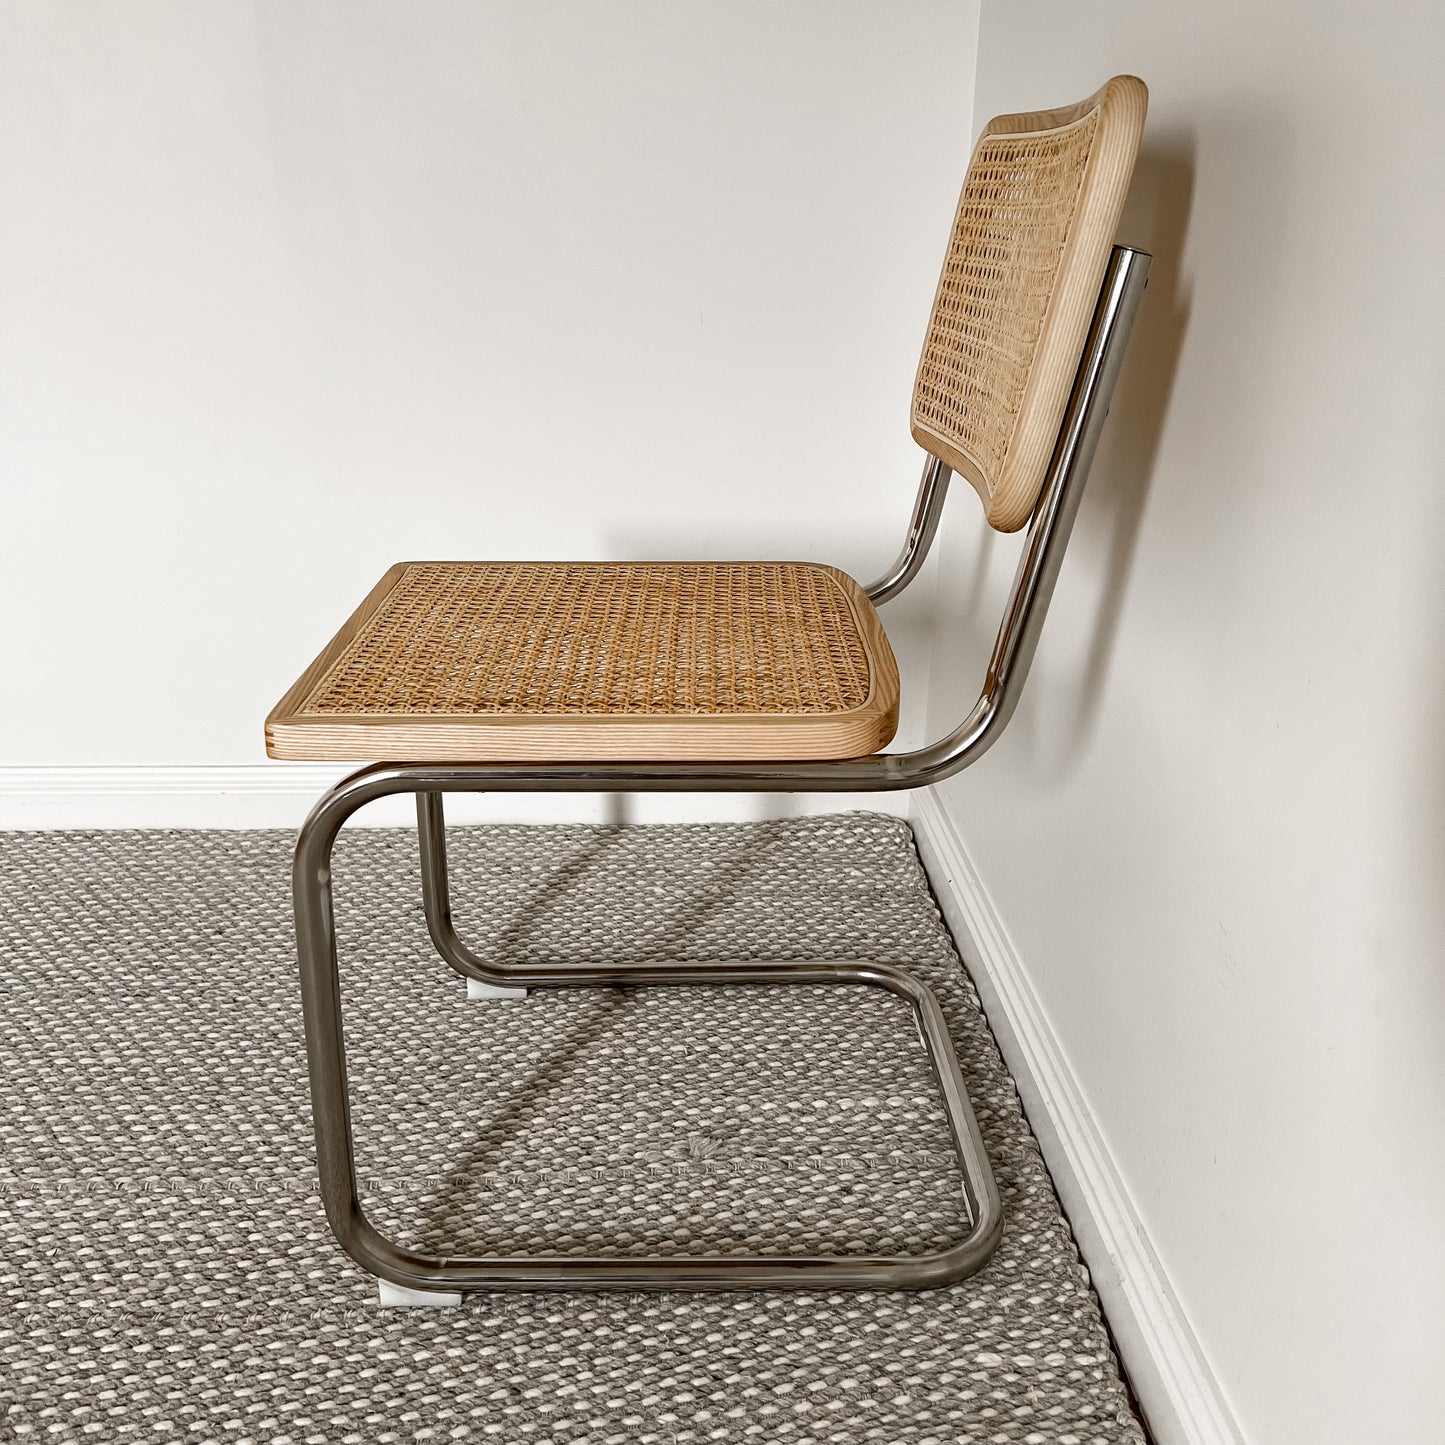 The Sisal Dining Chair